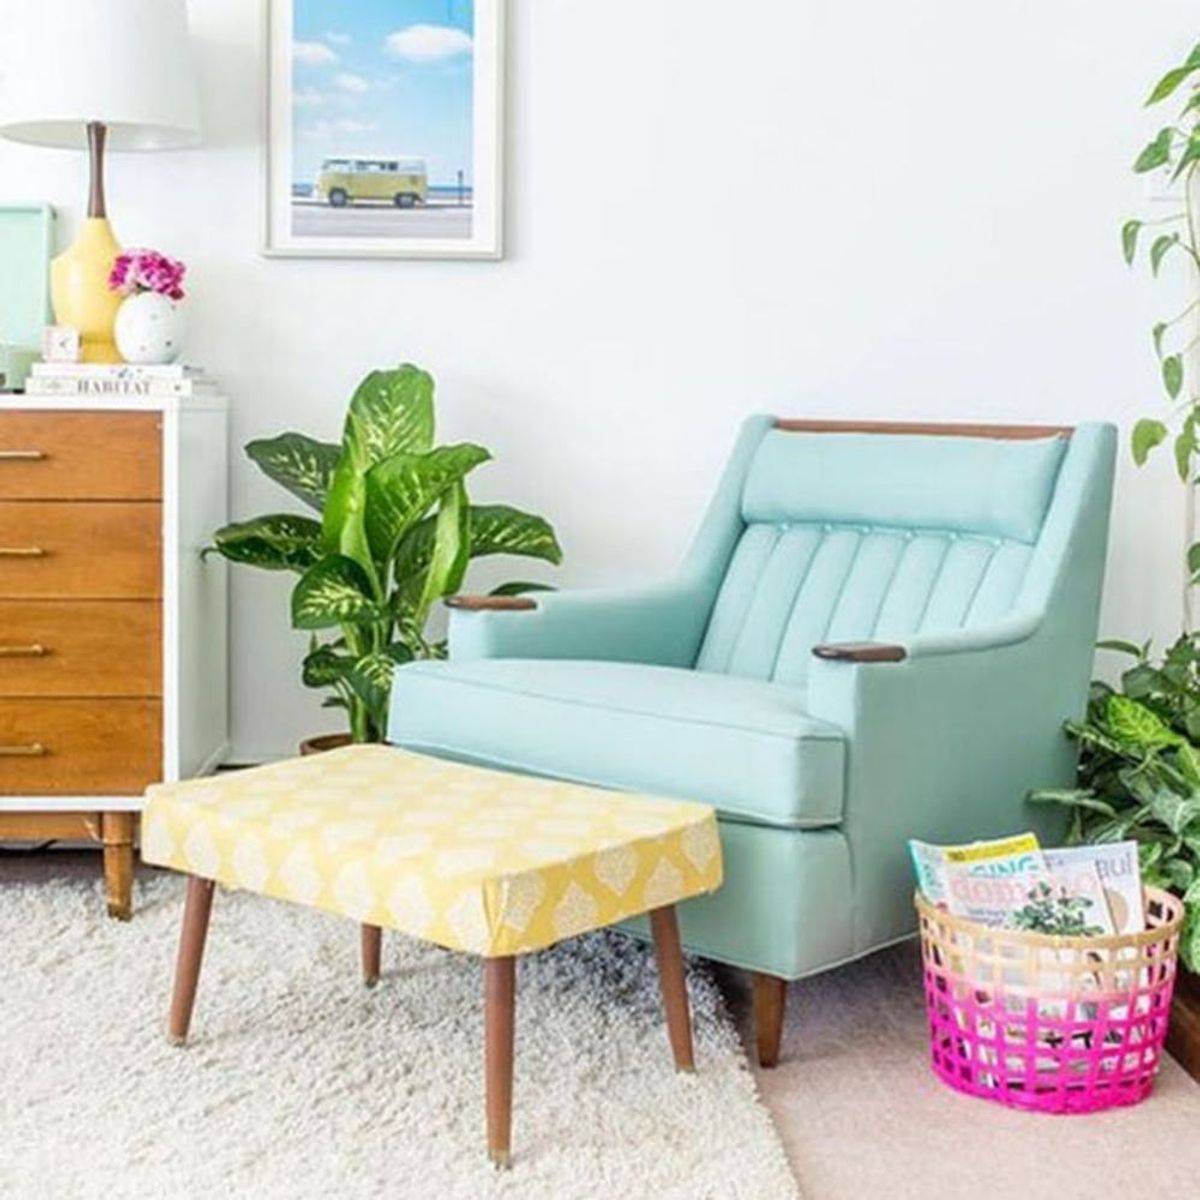 13 Mid-Century Modern Furniture Makeovers You Have to See to Believe